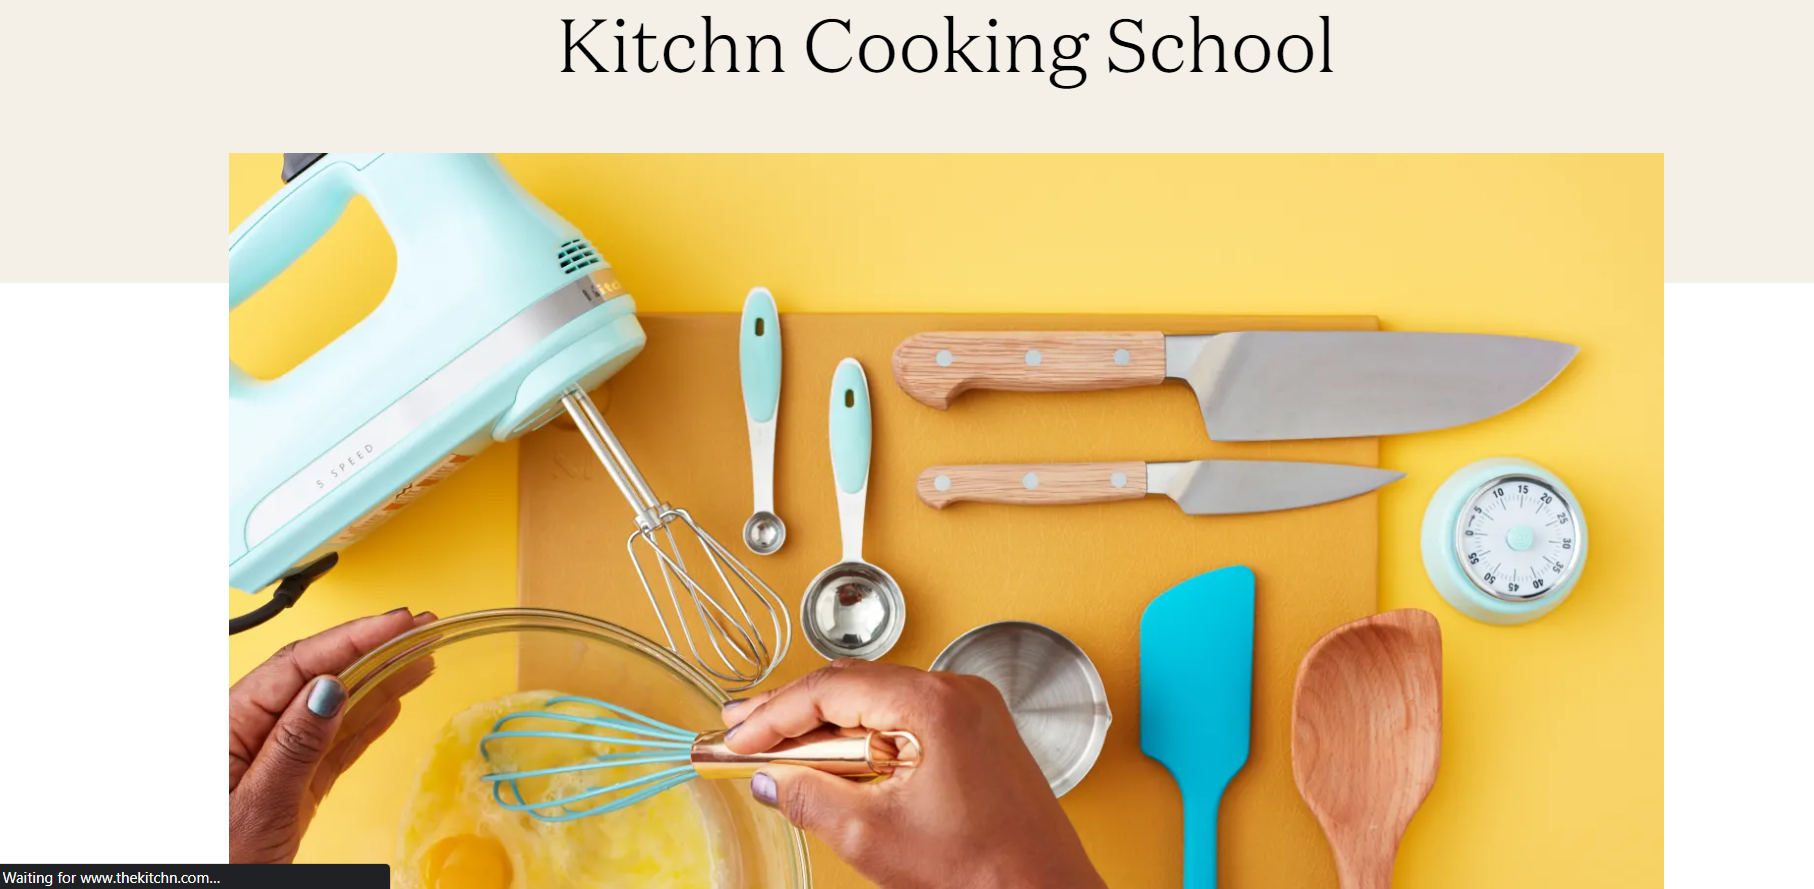 Kitchn Cooking School